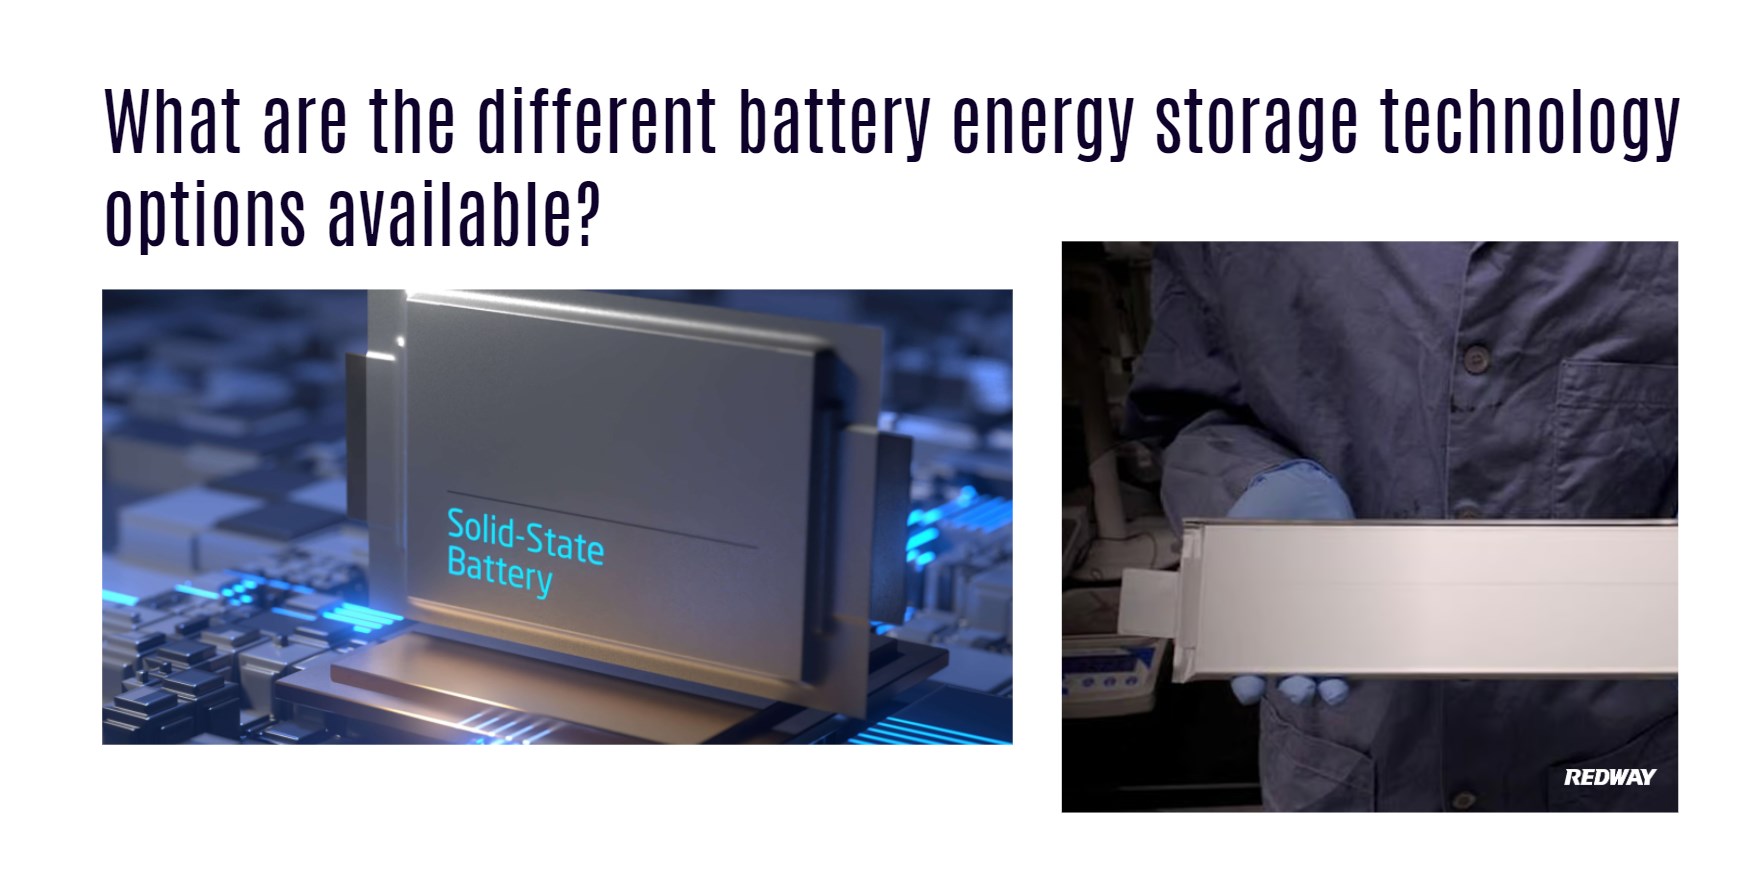 What are the different battery energy storage technology options available?